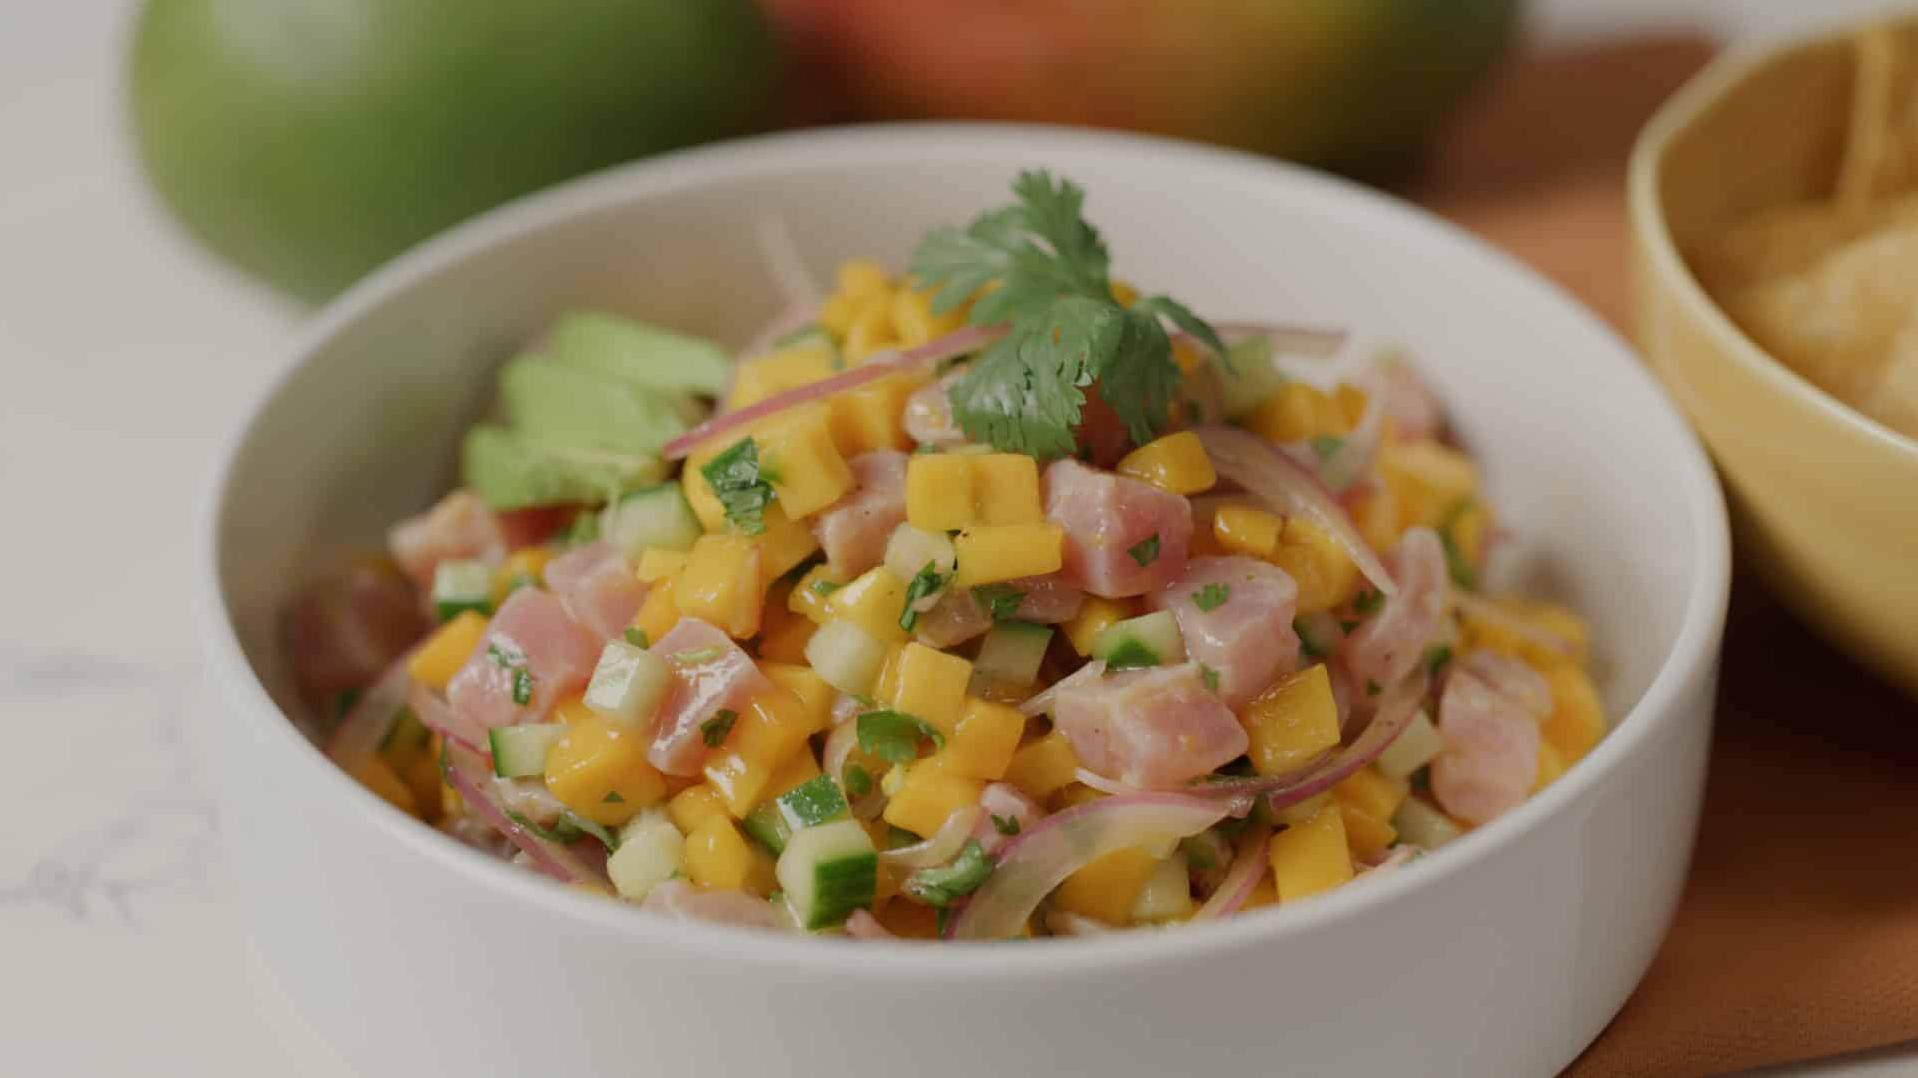  This ceviche is packed with protein and vitamins, making it a healthy meal option.